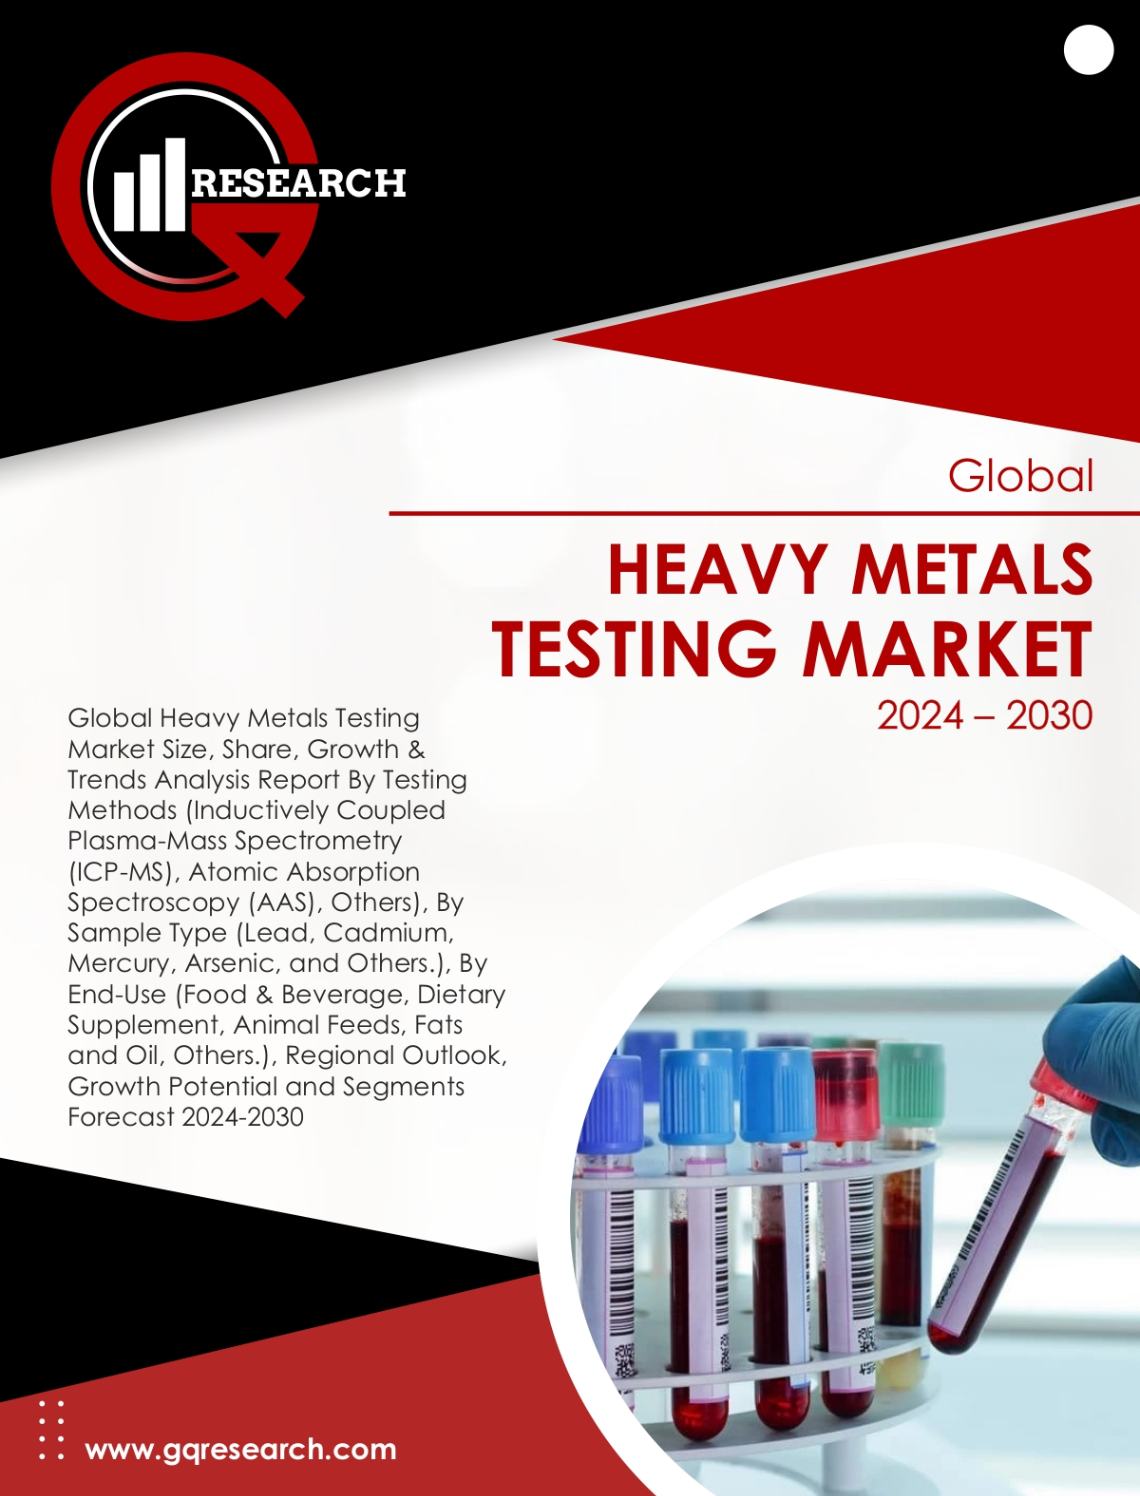 Heavy Metals Testing Market Size, Share, Growth & Forecast to 2030 | GQ Research